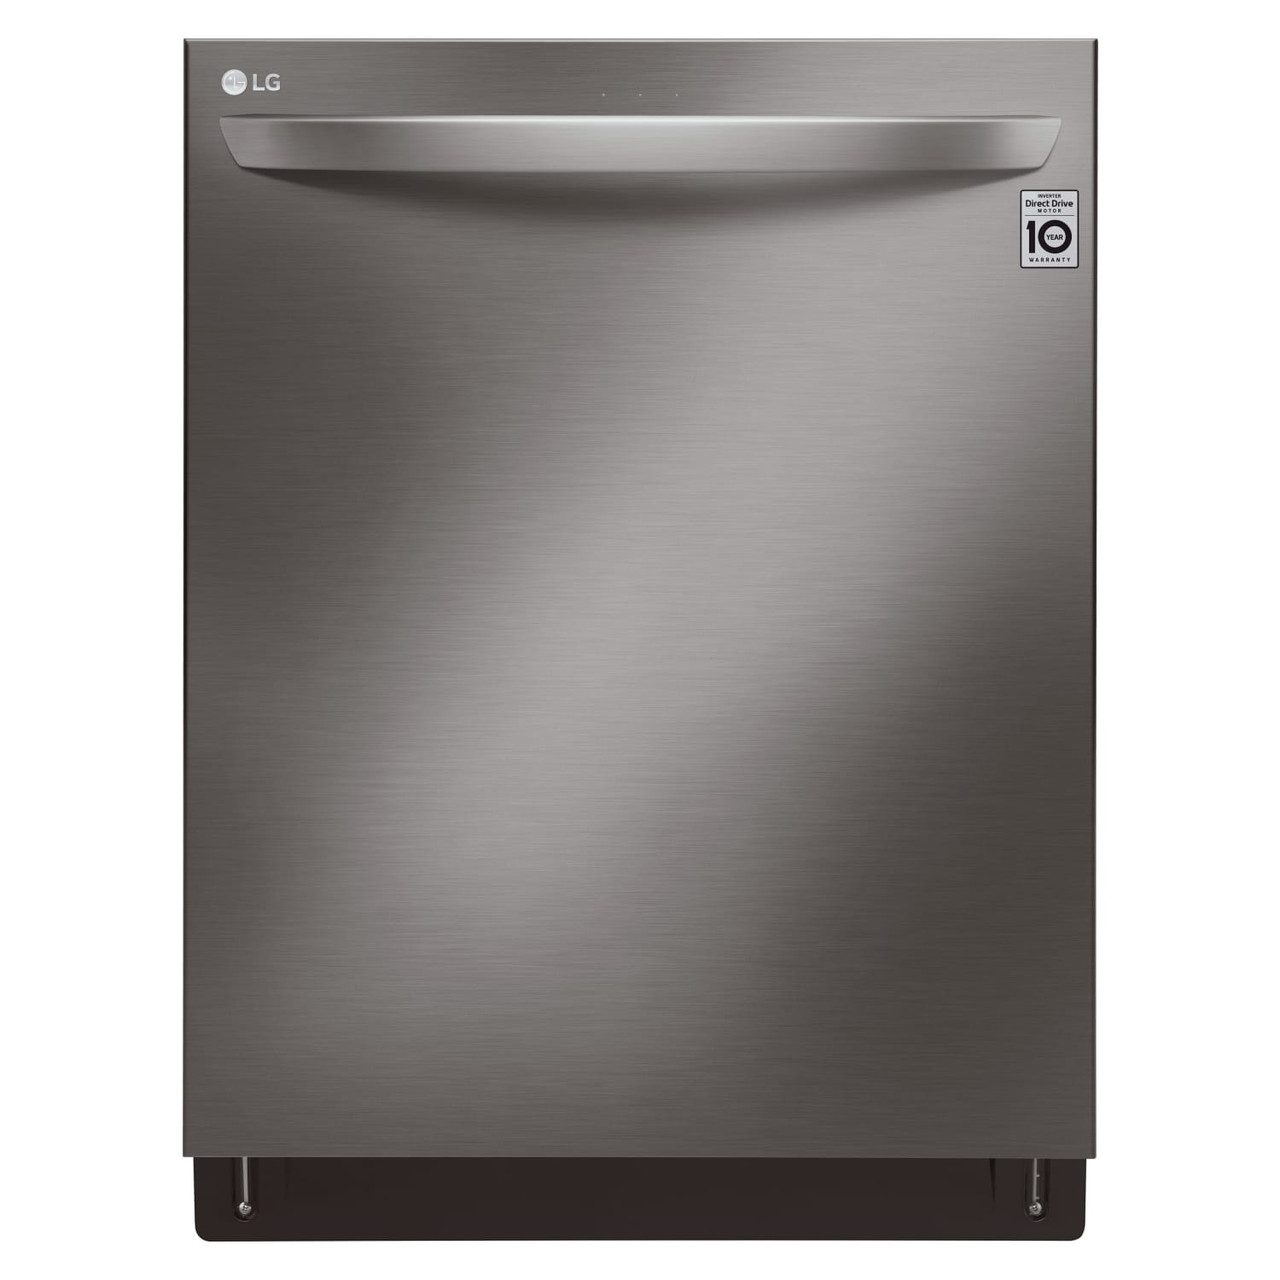 LG Top Control Smart Wi-Fi Enabled Dishwasher with QuadWash and TrueSteam - LDT7808BD